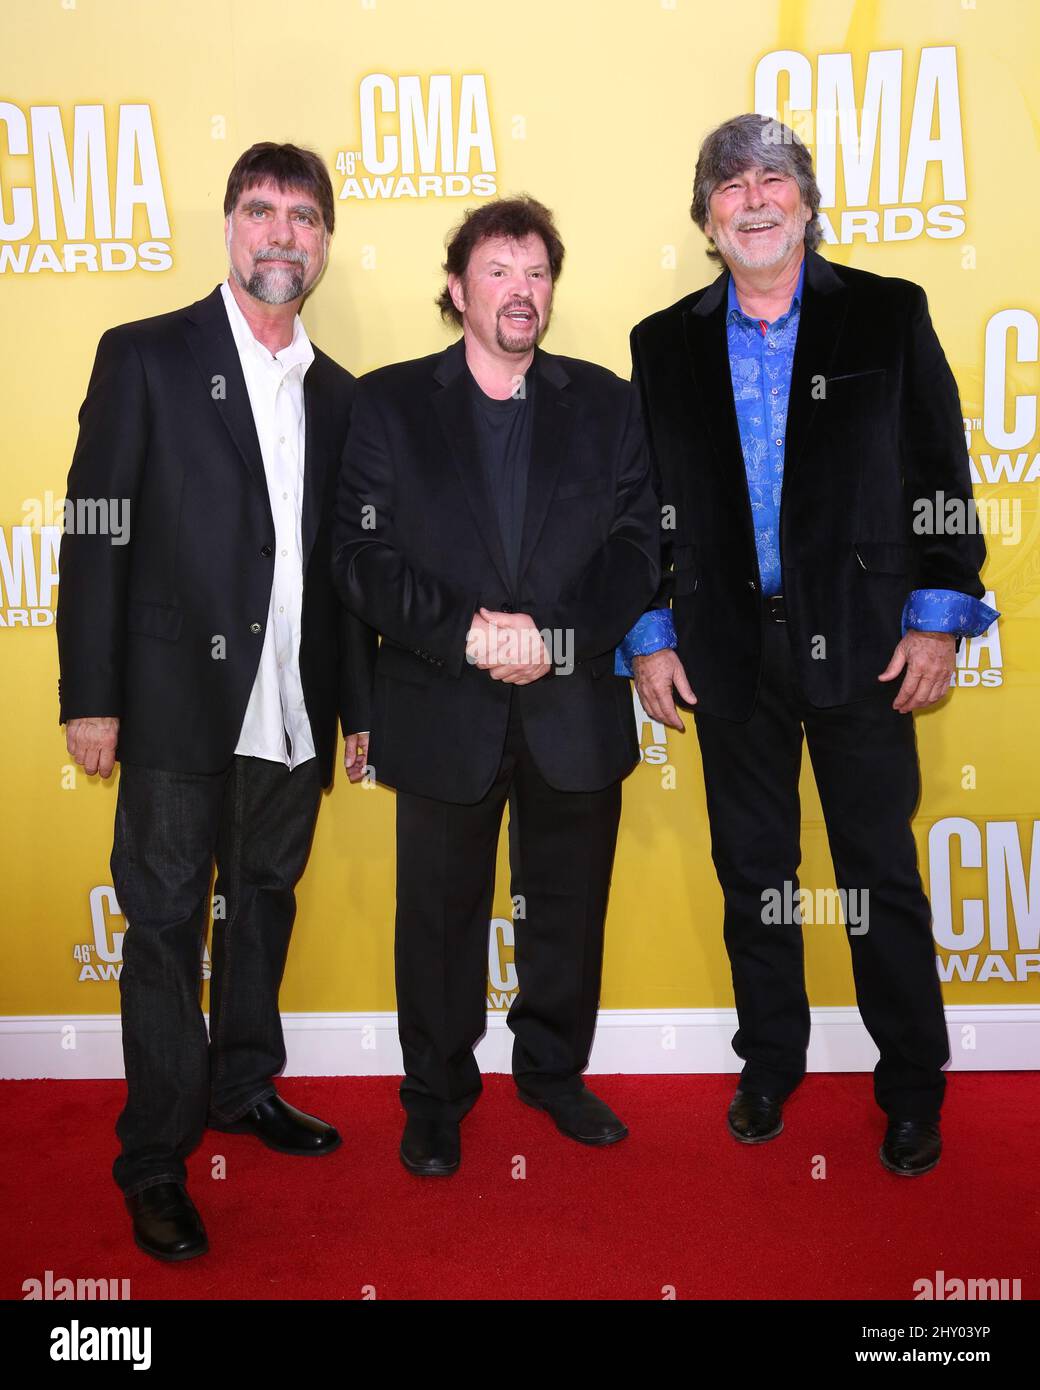 Teddy Gentry,Jeff Cook,Randy Owen,Alabama attending the press room at the 46th Annual Country Music Awards in Nashville, Tennessee. Stock Photo